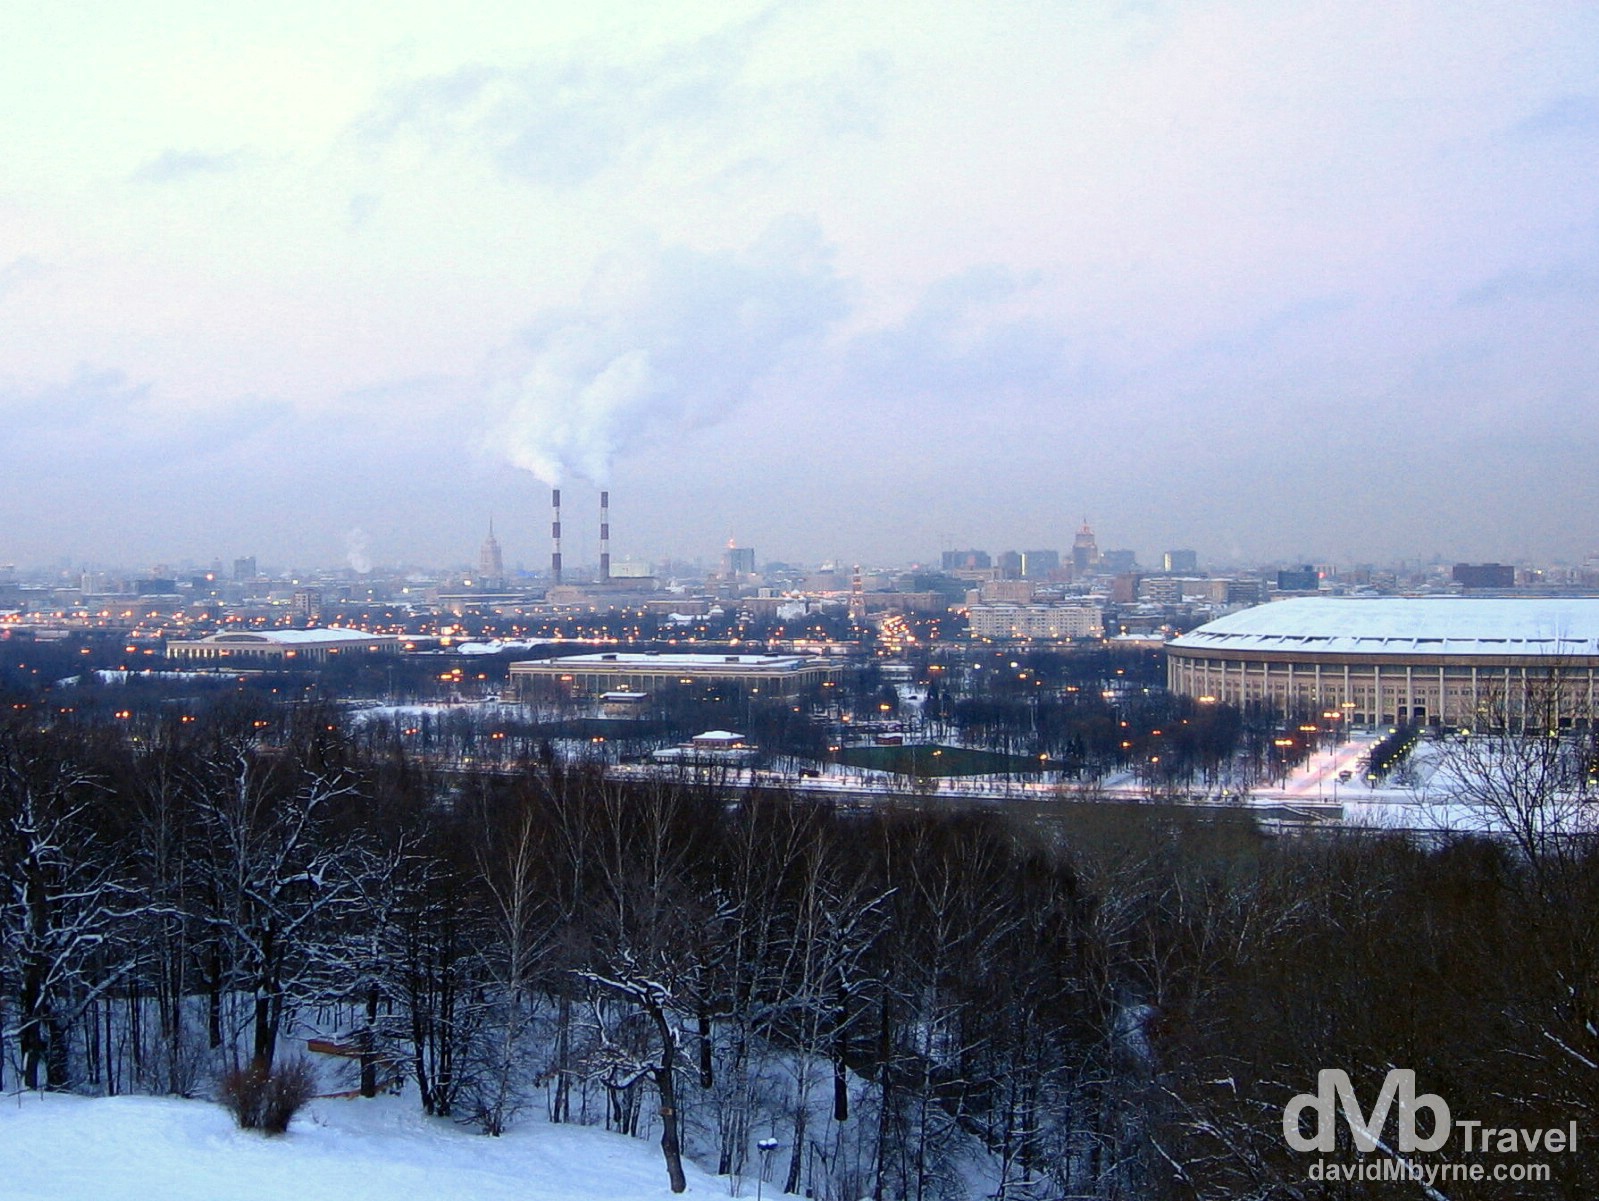 A section of Moscow as seen from Sparrow Hills overlooking the city. Moscow, Russia. February 26, 2006. 